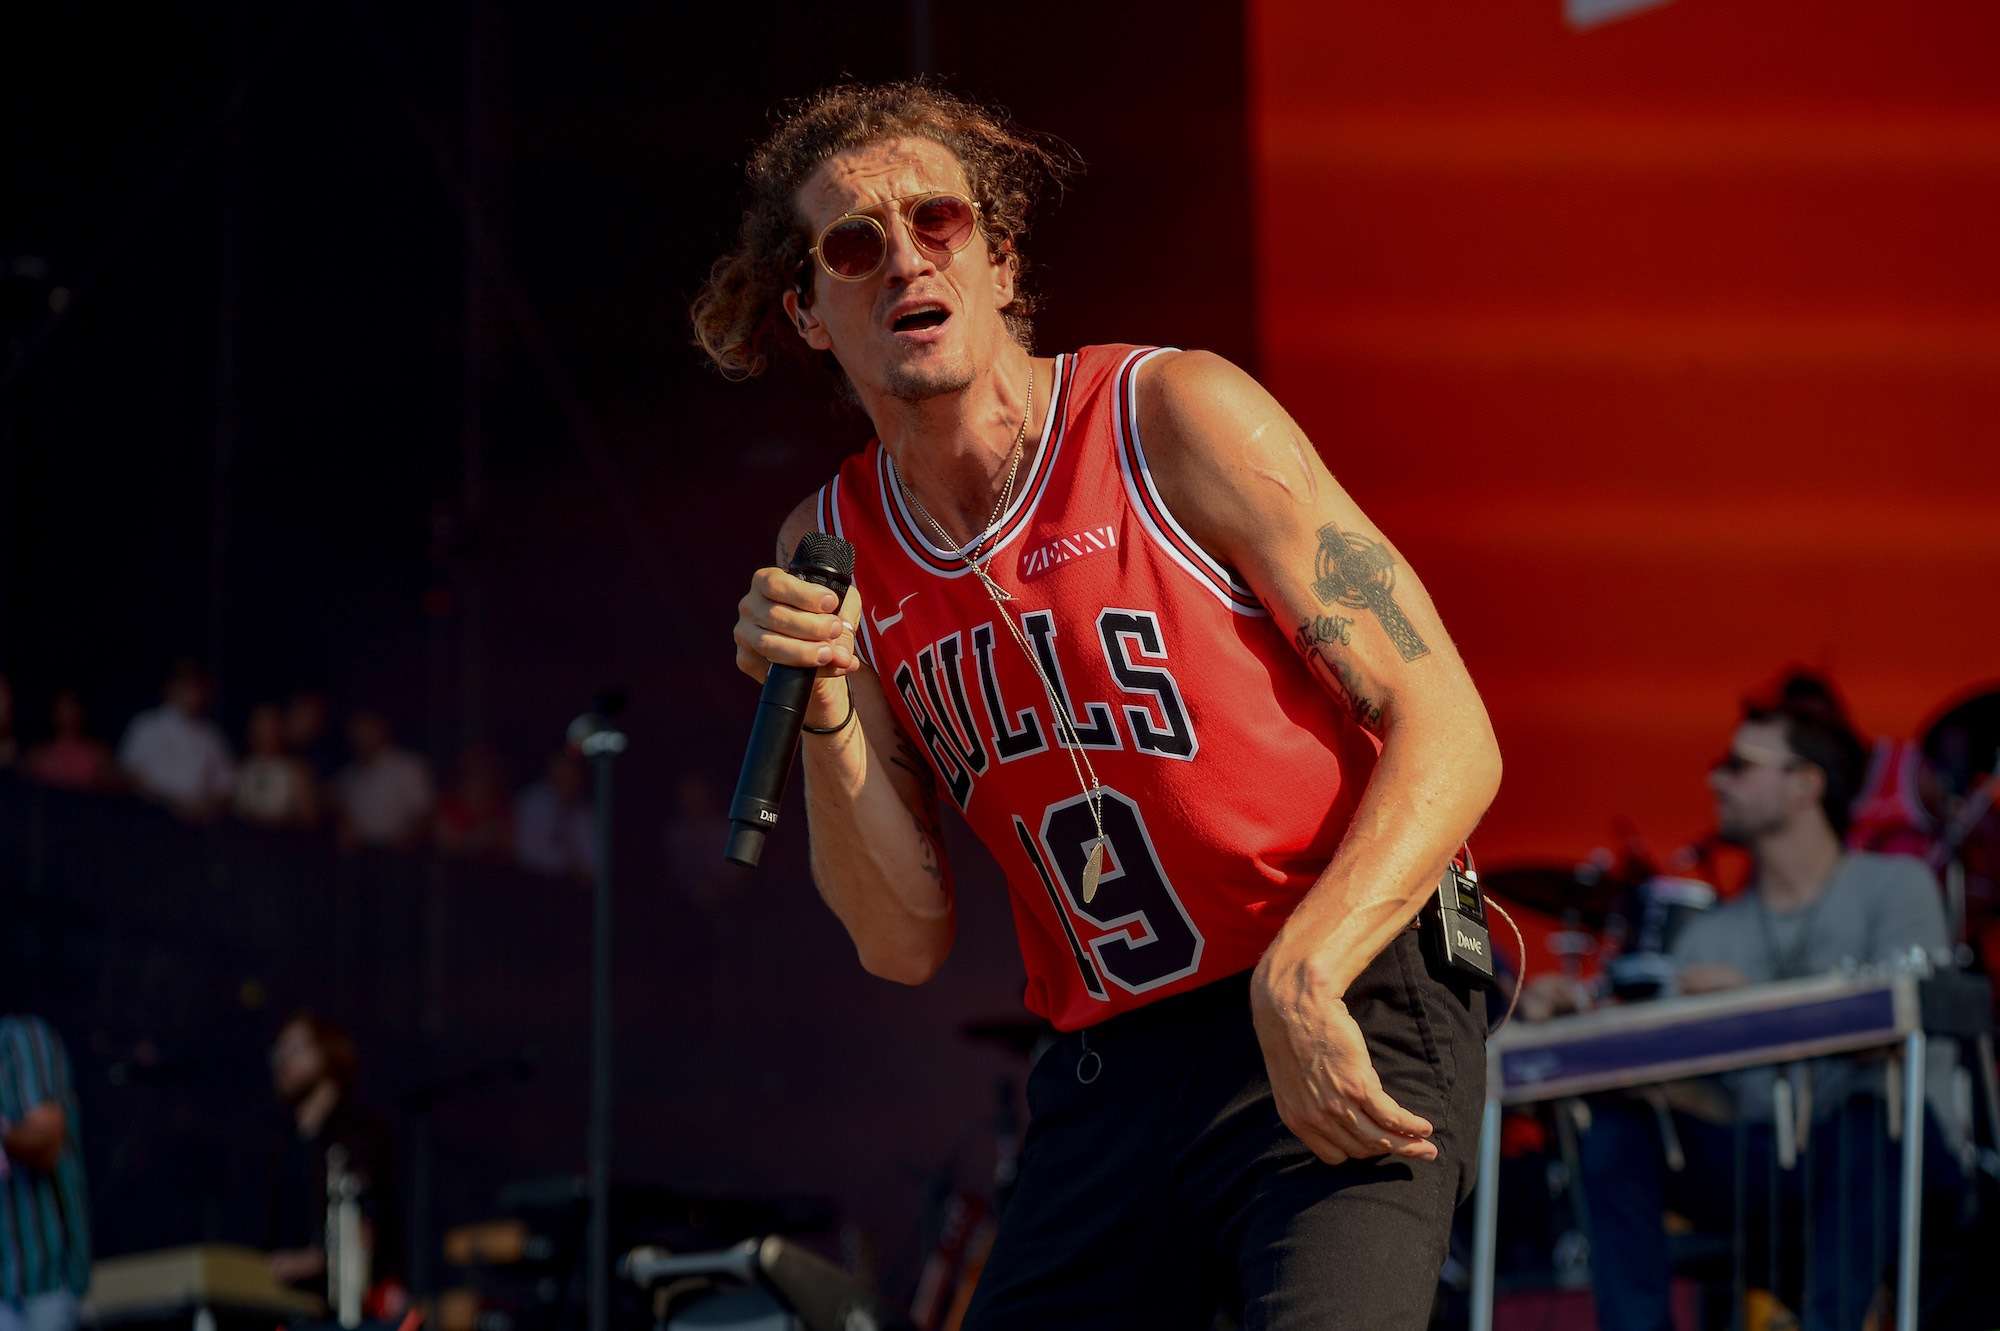 The Revivalists Live at Lollapalooza [GALLERY] 8